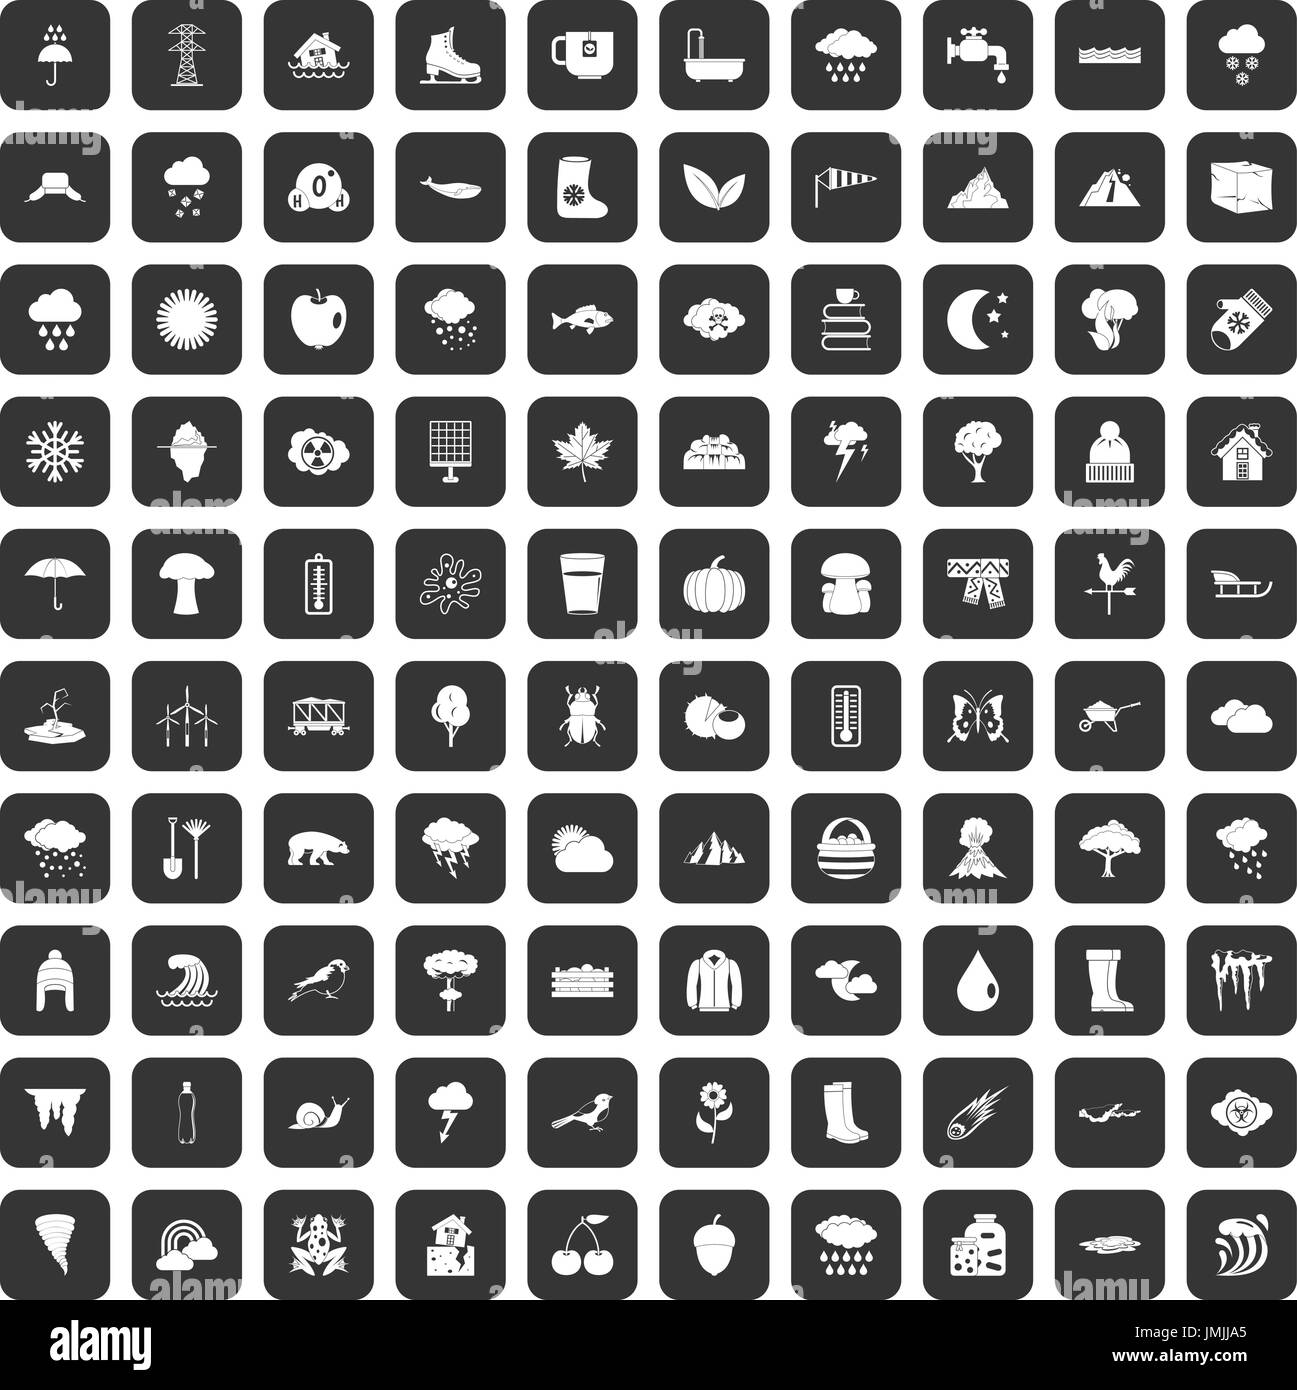 100 clouds icons set black Stock Vector